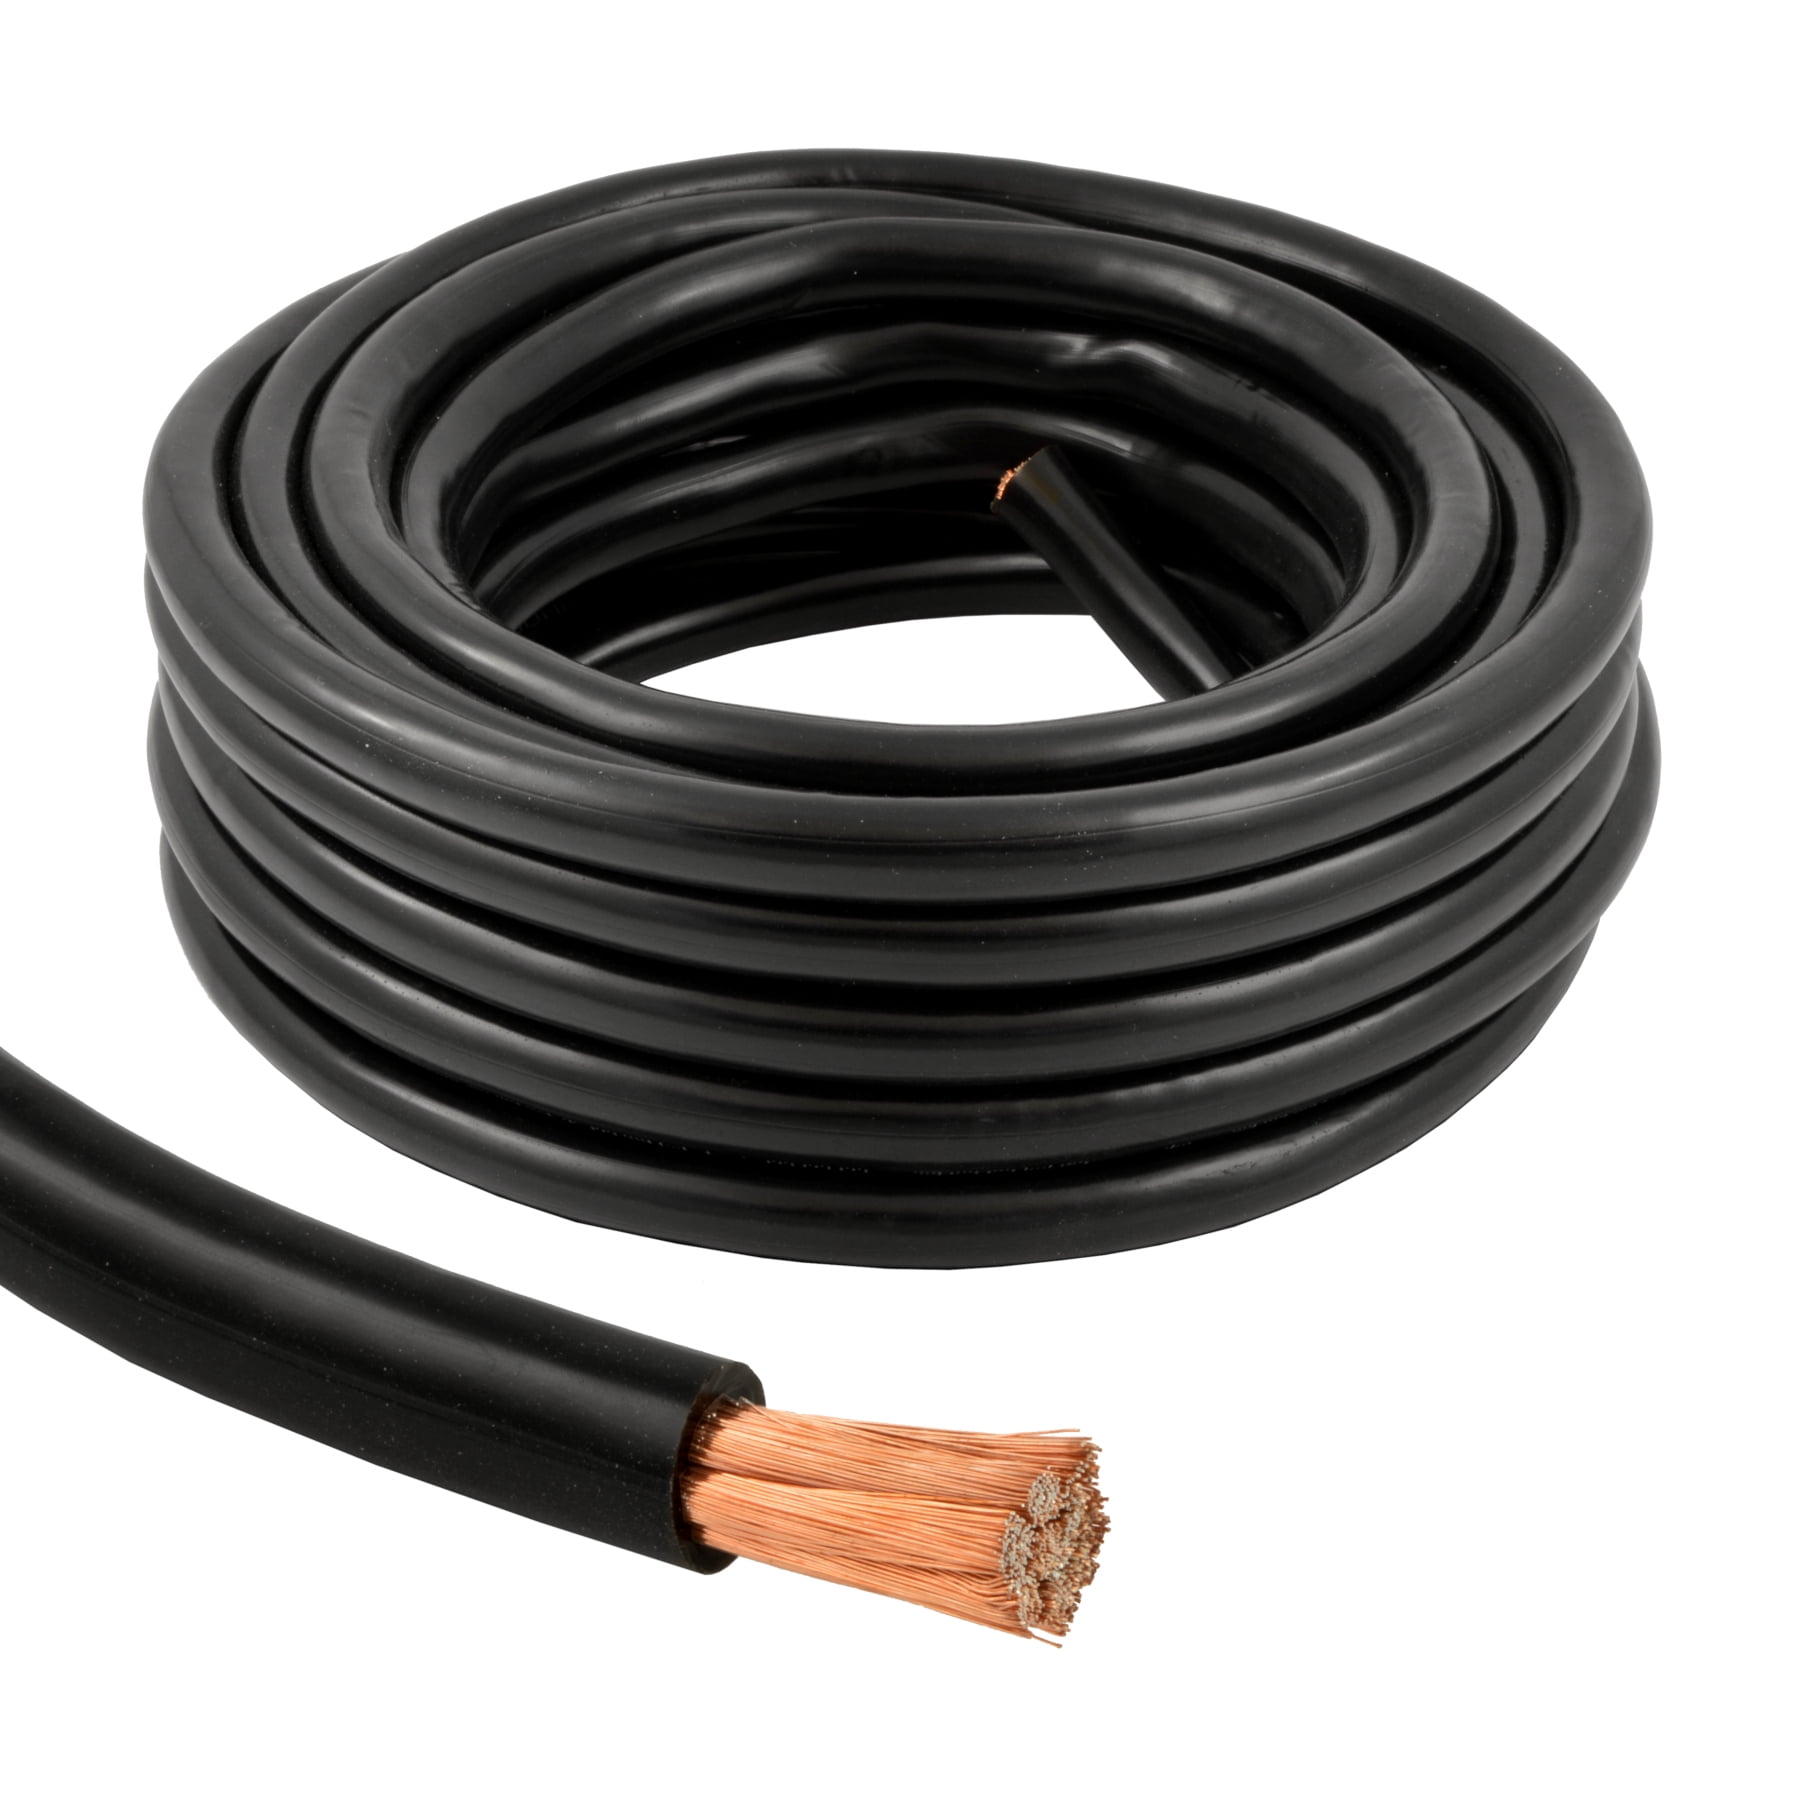 4 Gauge 25 Feet High Performance Flexi Amp Power/Ground Cable 4 AWG Wire  Black